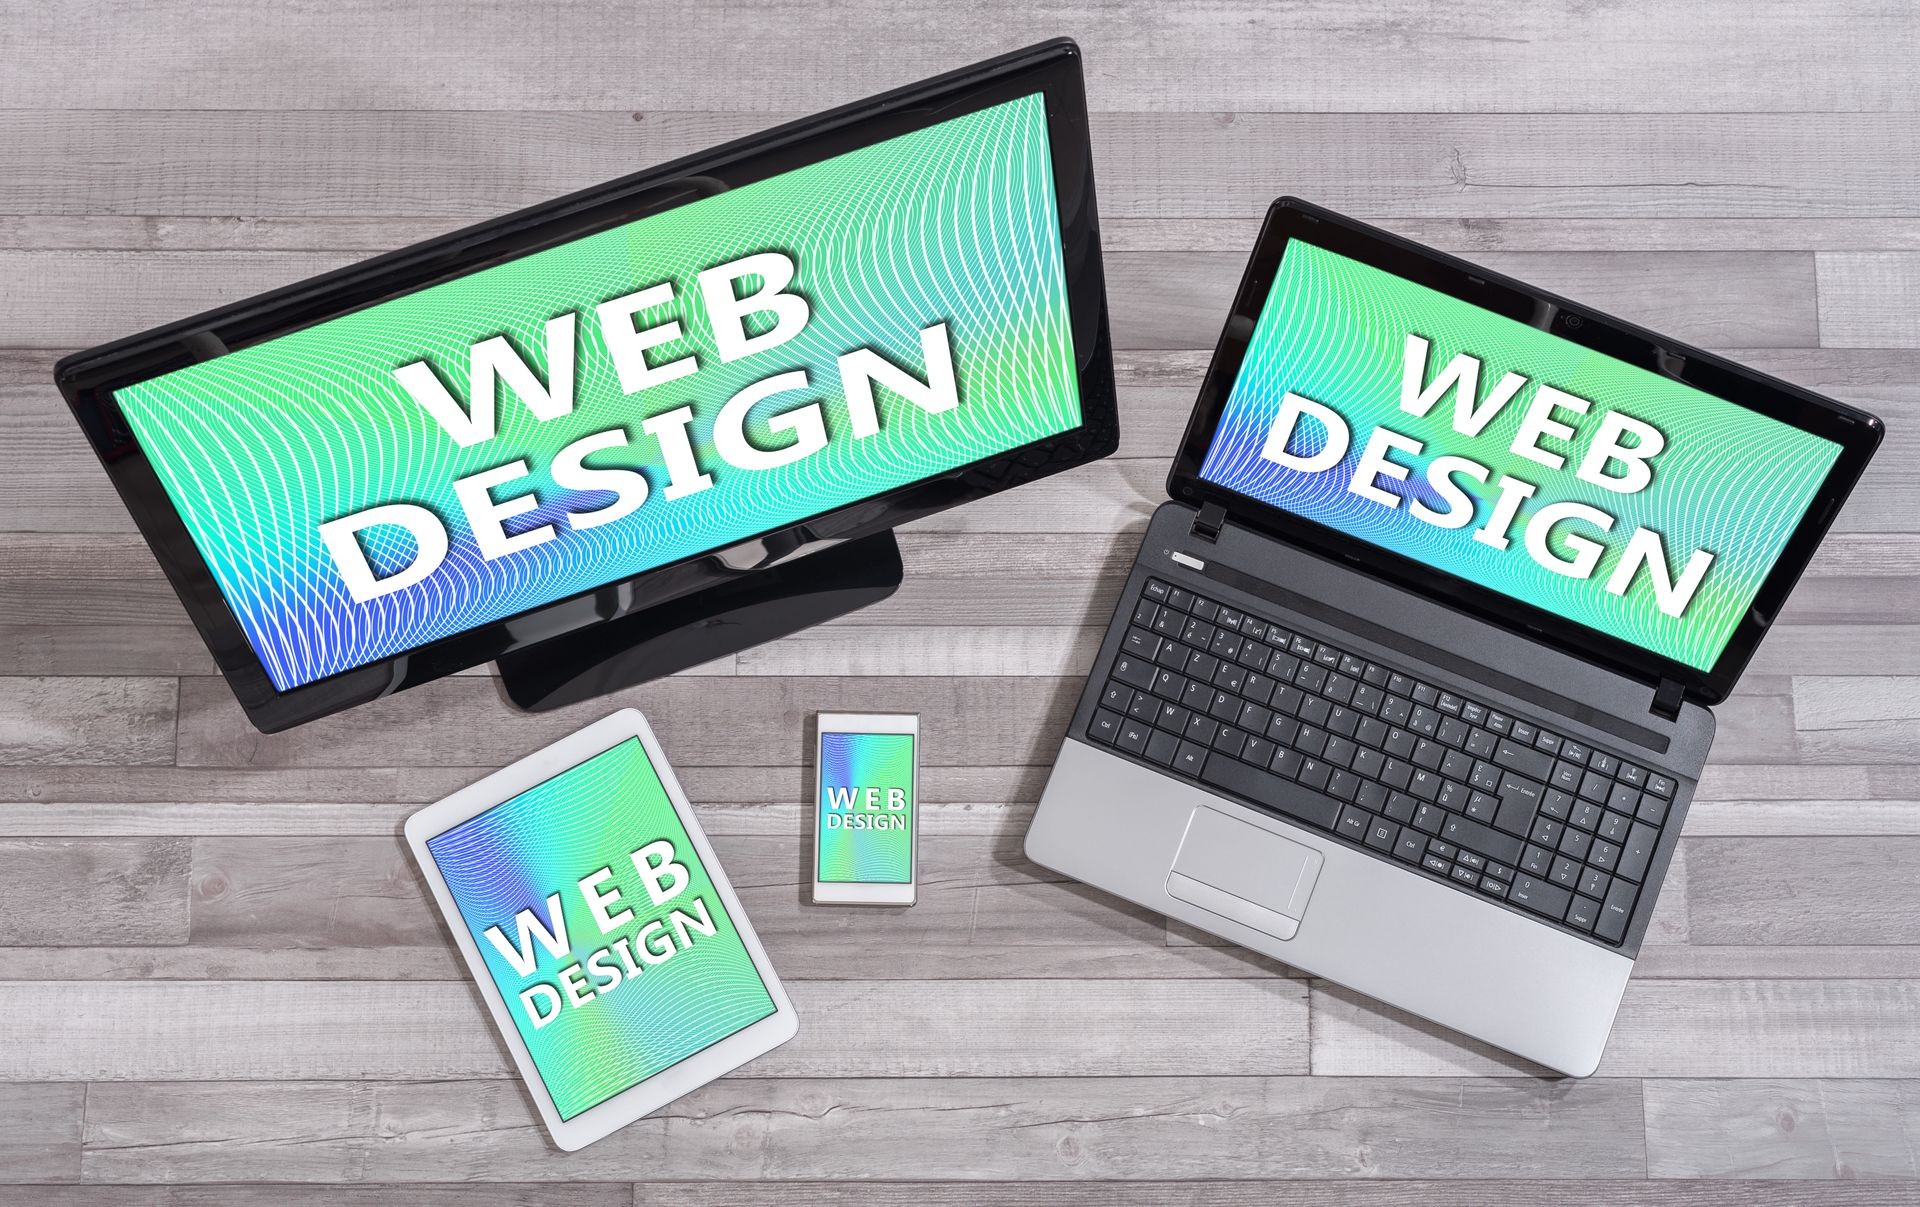 Web design concept shown on different information technology devices